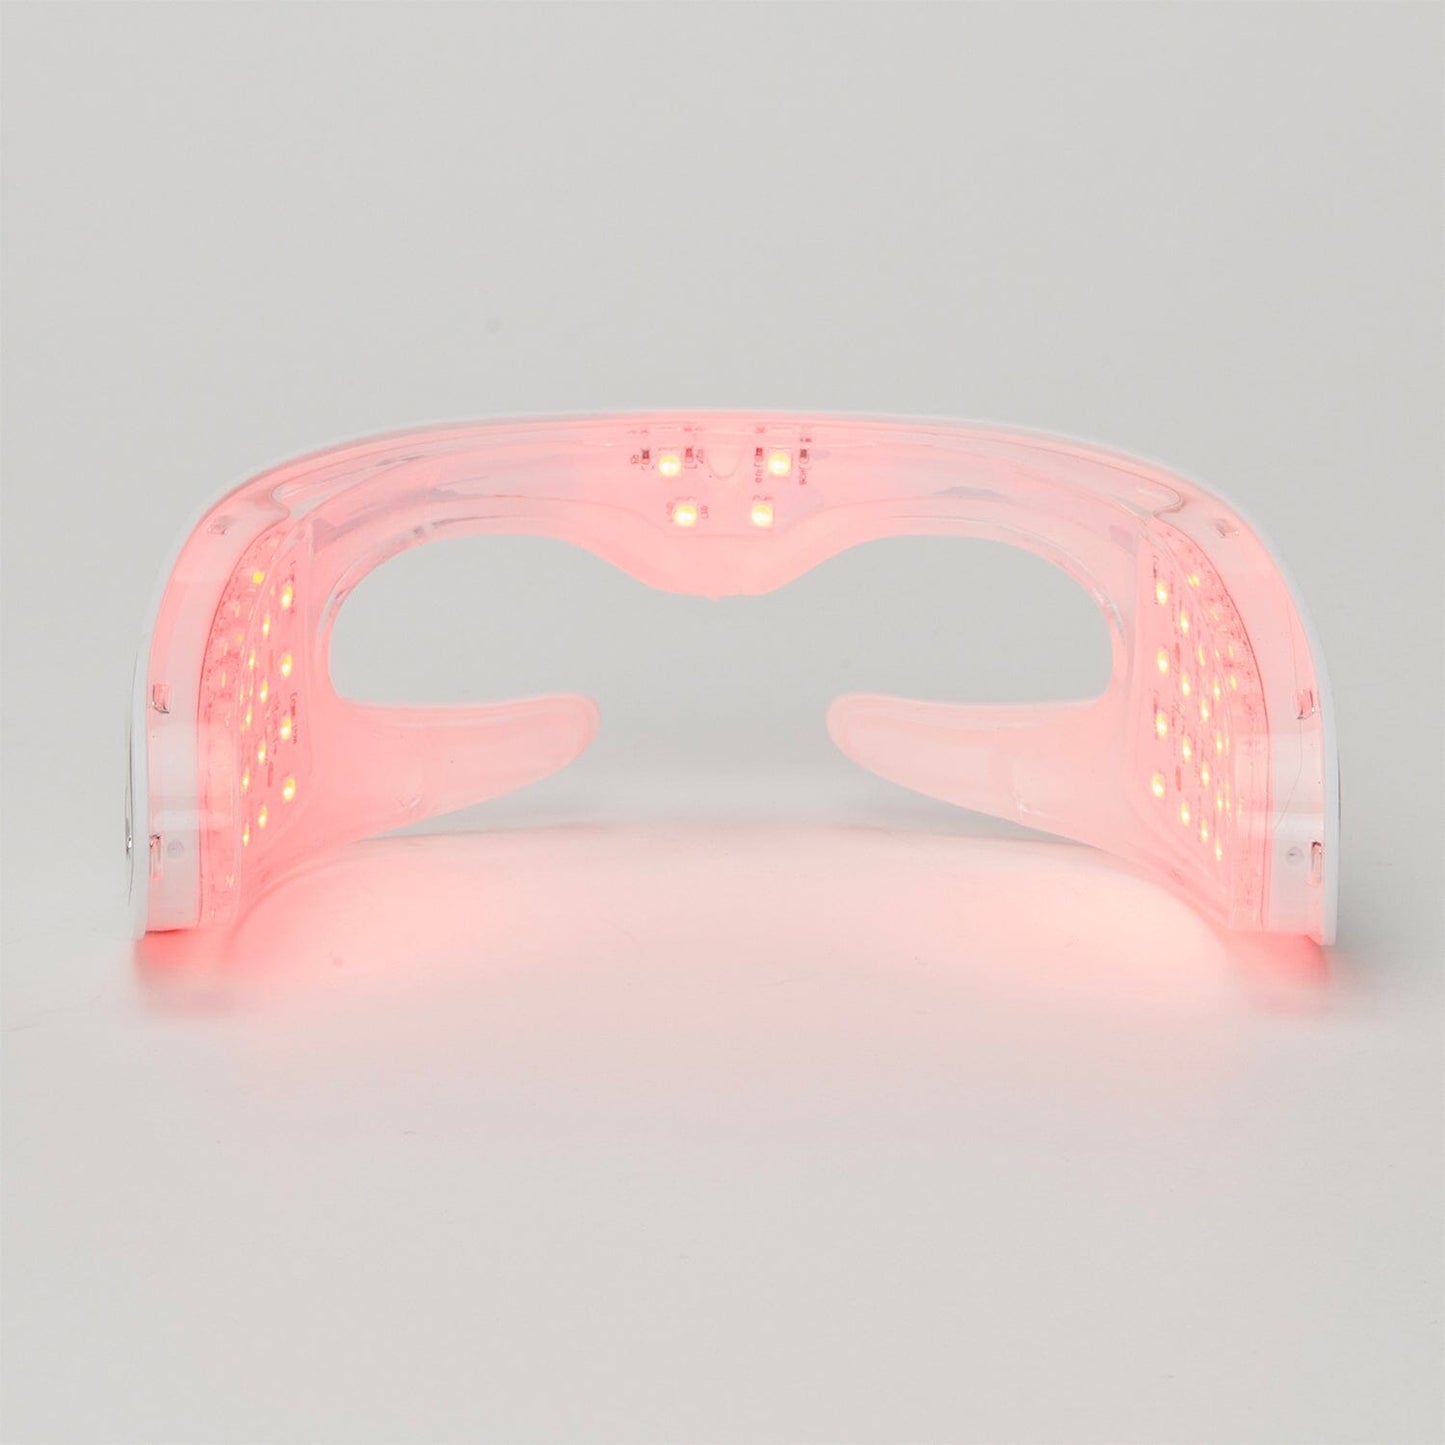 STYLPRO Radiant Eyes Red LED Goggles